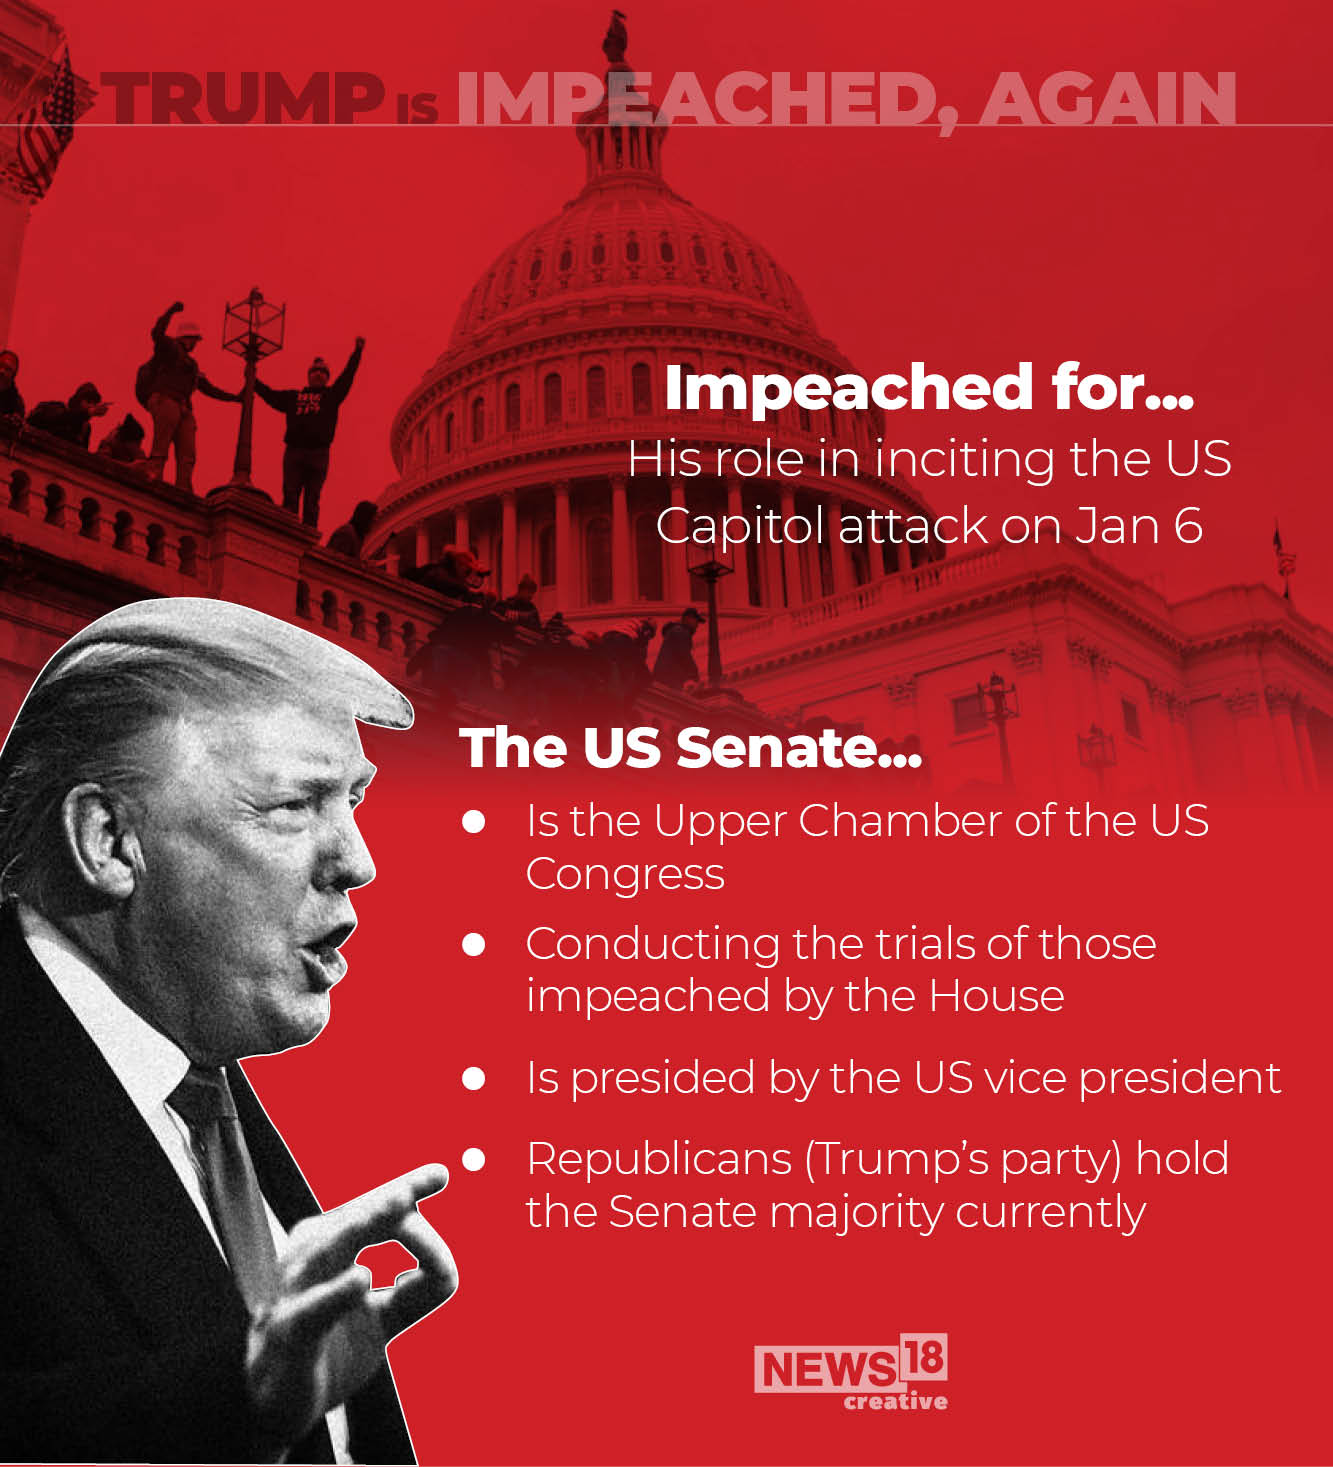 Donald Trump is impeached, again. What now?